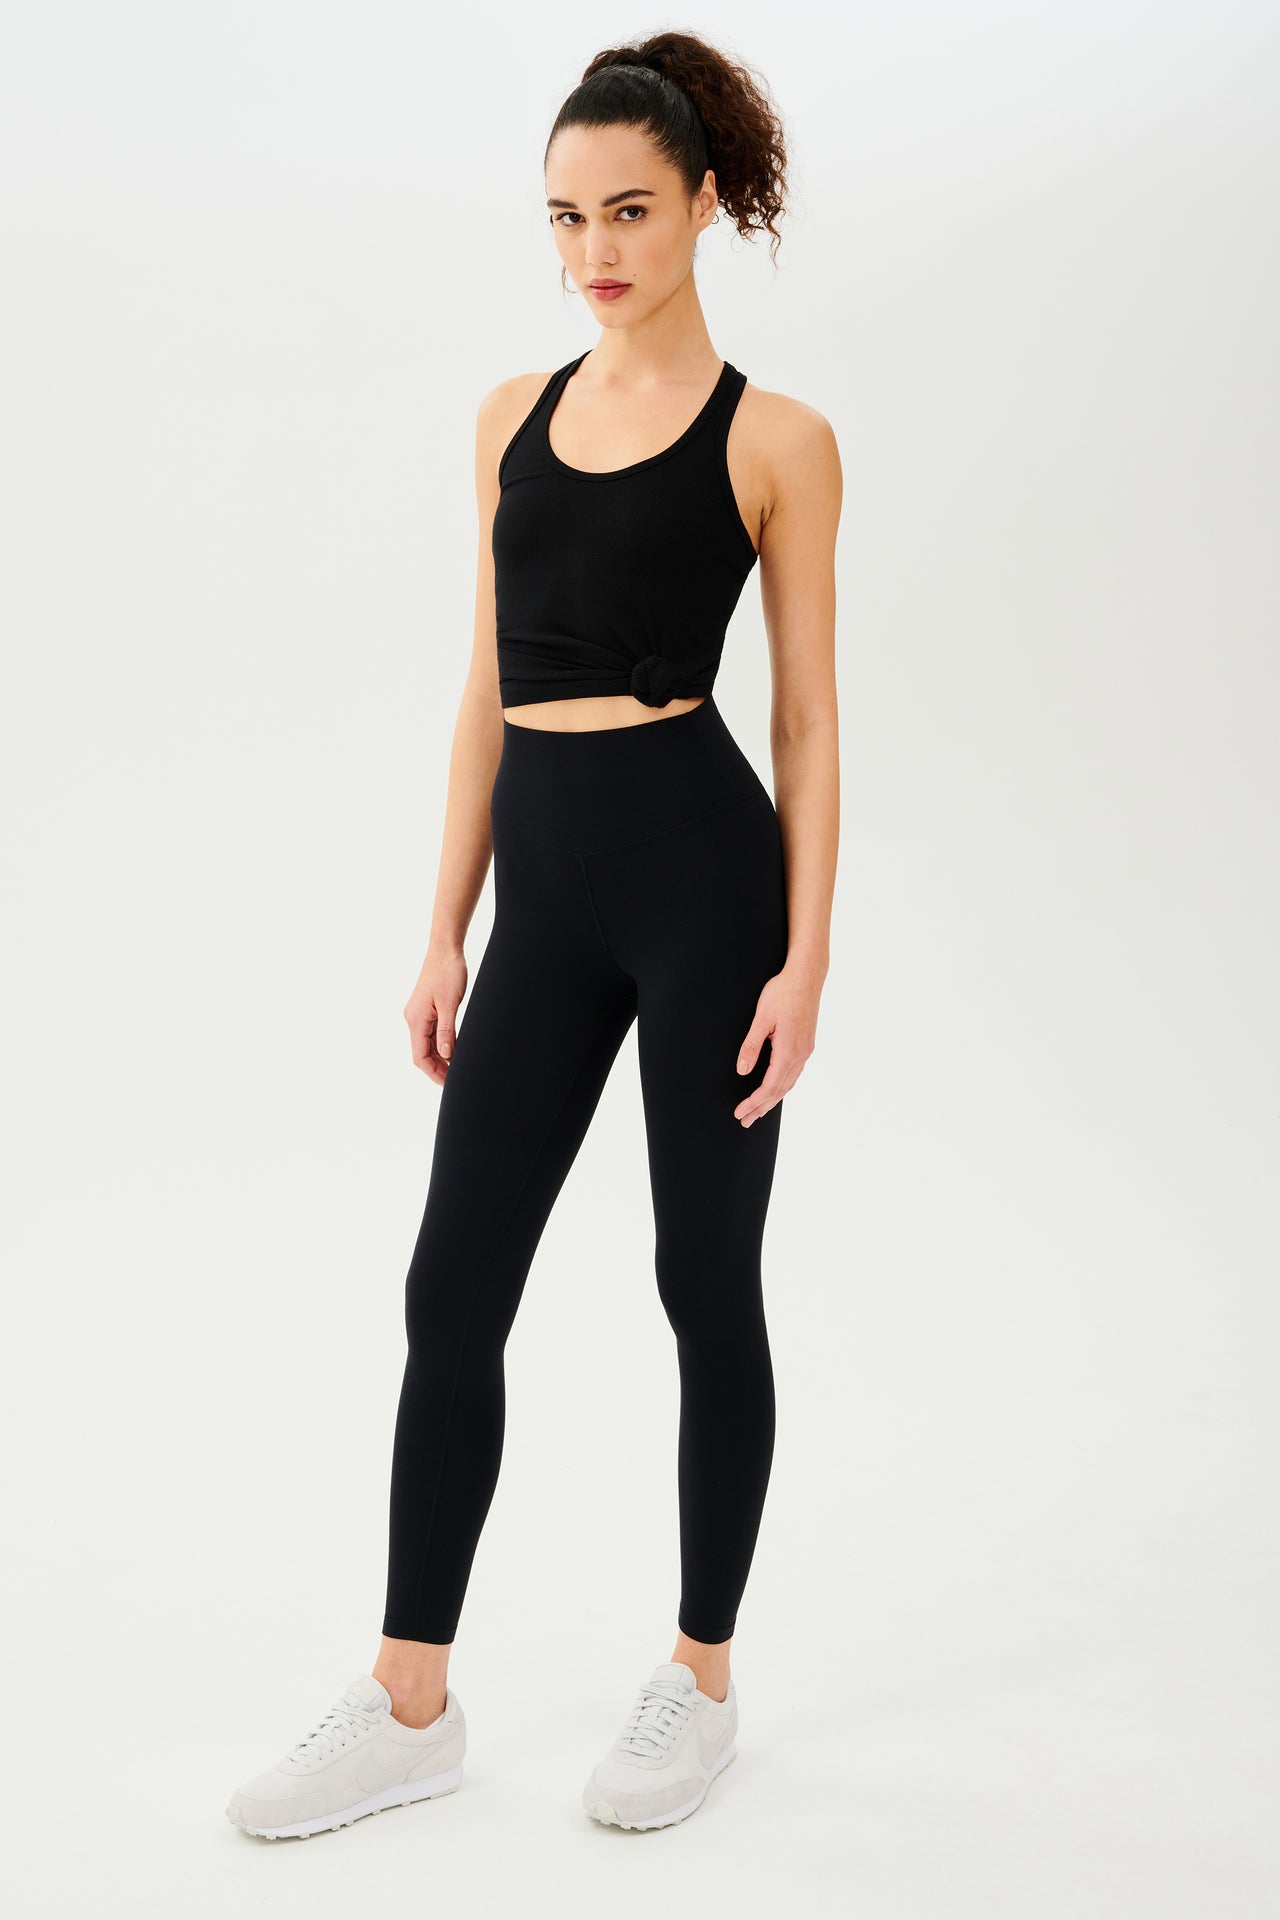 Full side view of girl wearing a black tank top and black leggings with white shoes